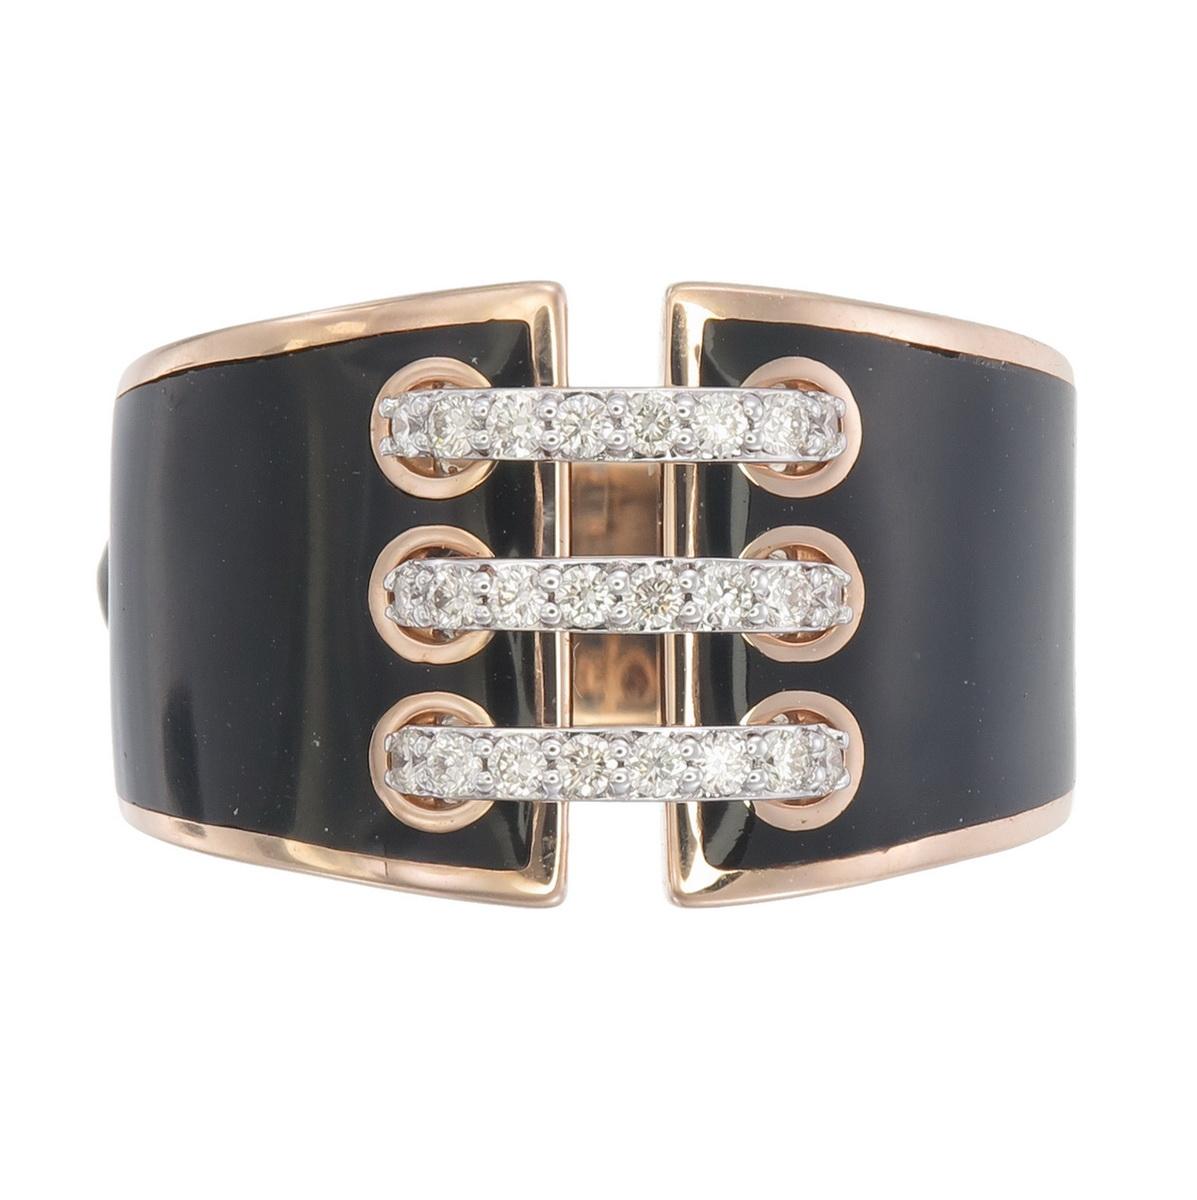 Ring made using Black Ceramic n 18kt Rose gold with natural diamonds

5.26 grams & 0.22 carats of natural diamonds are used in this ring